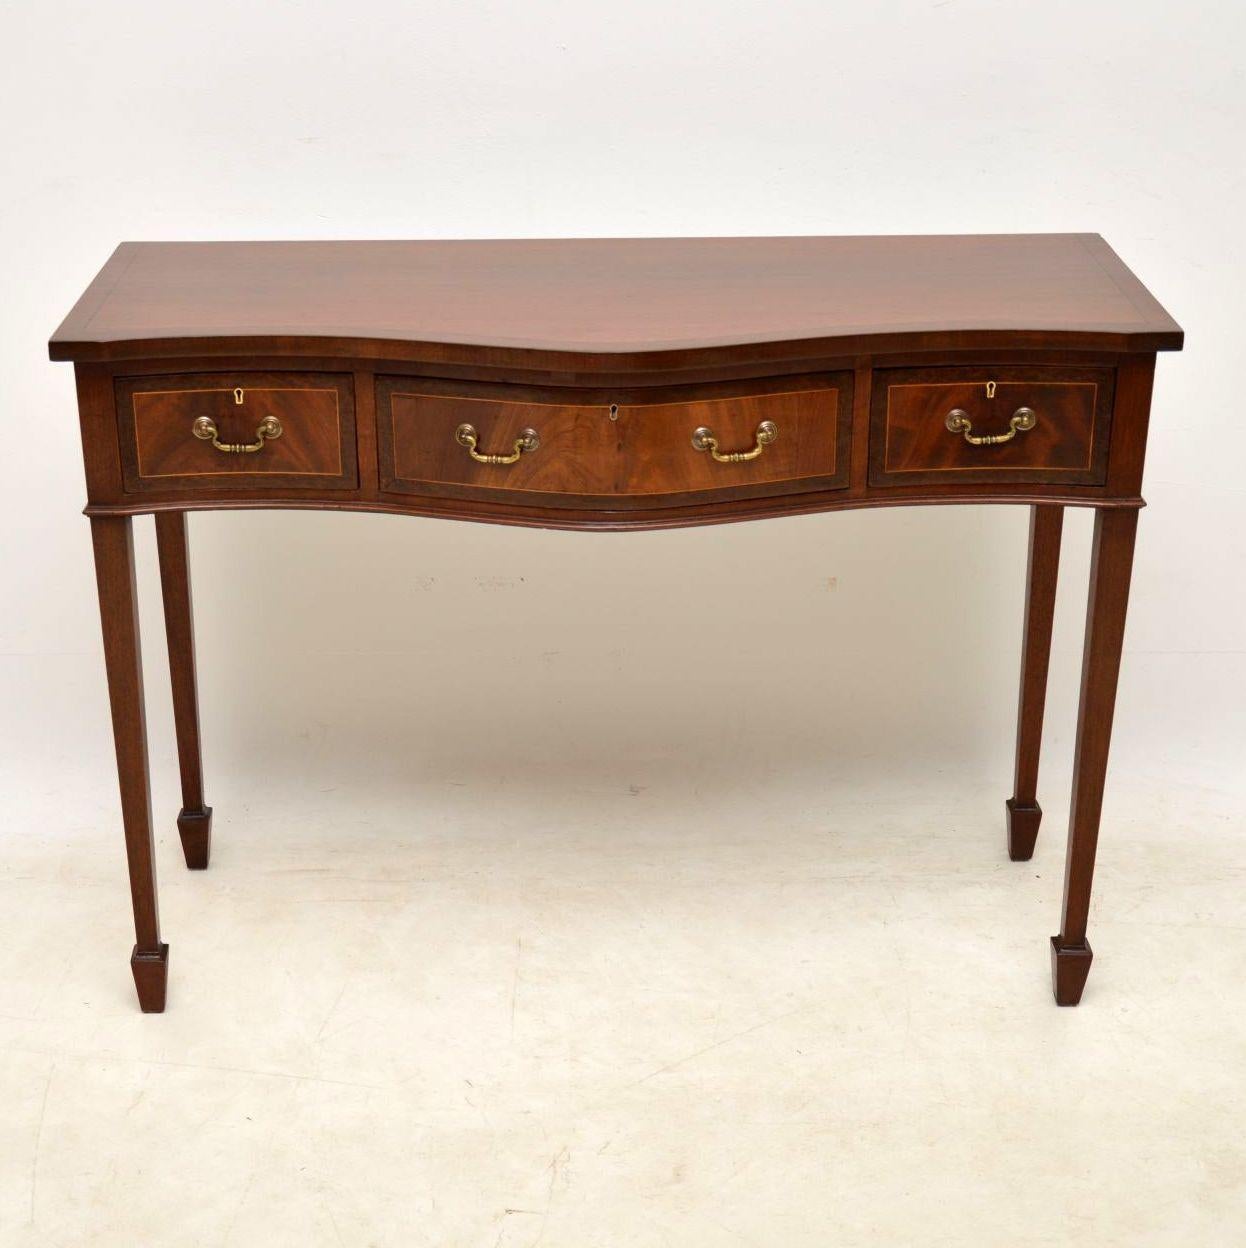 Antique mahogany console side table with a serpentine shaped front, three drawers & sitting on tapered spade end legs. The top has an ebony inlay with cross banding outside of that. The drawer fronts have flame mahogany panels with satinwood inlay &